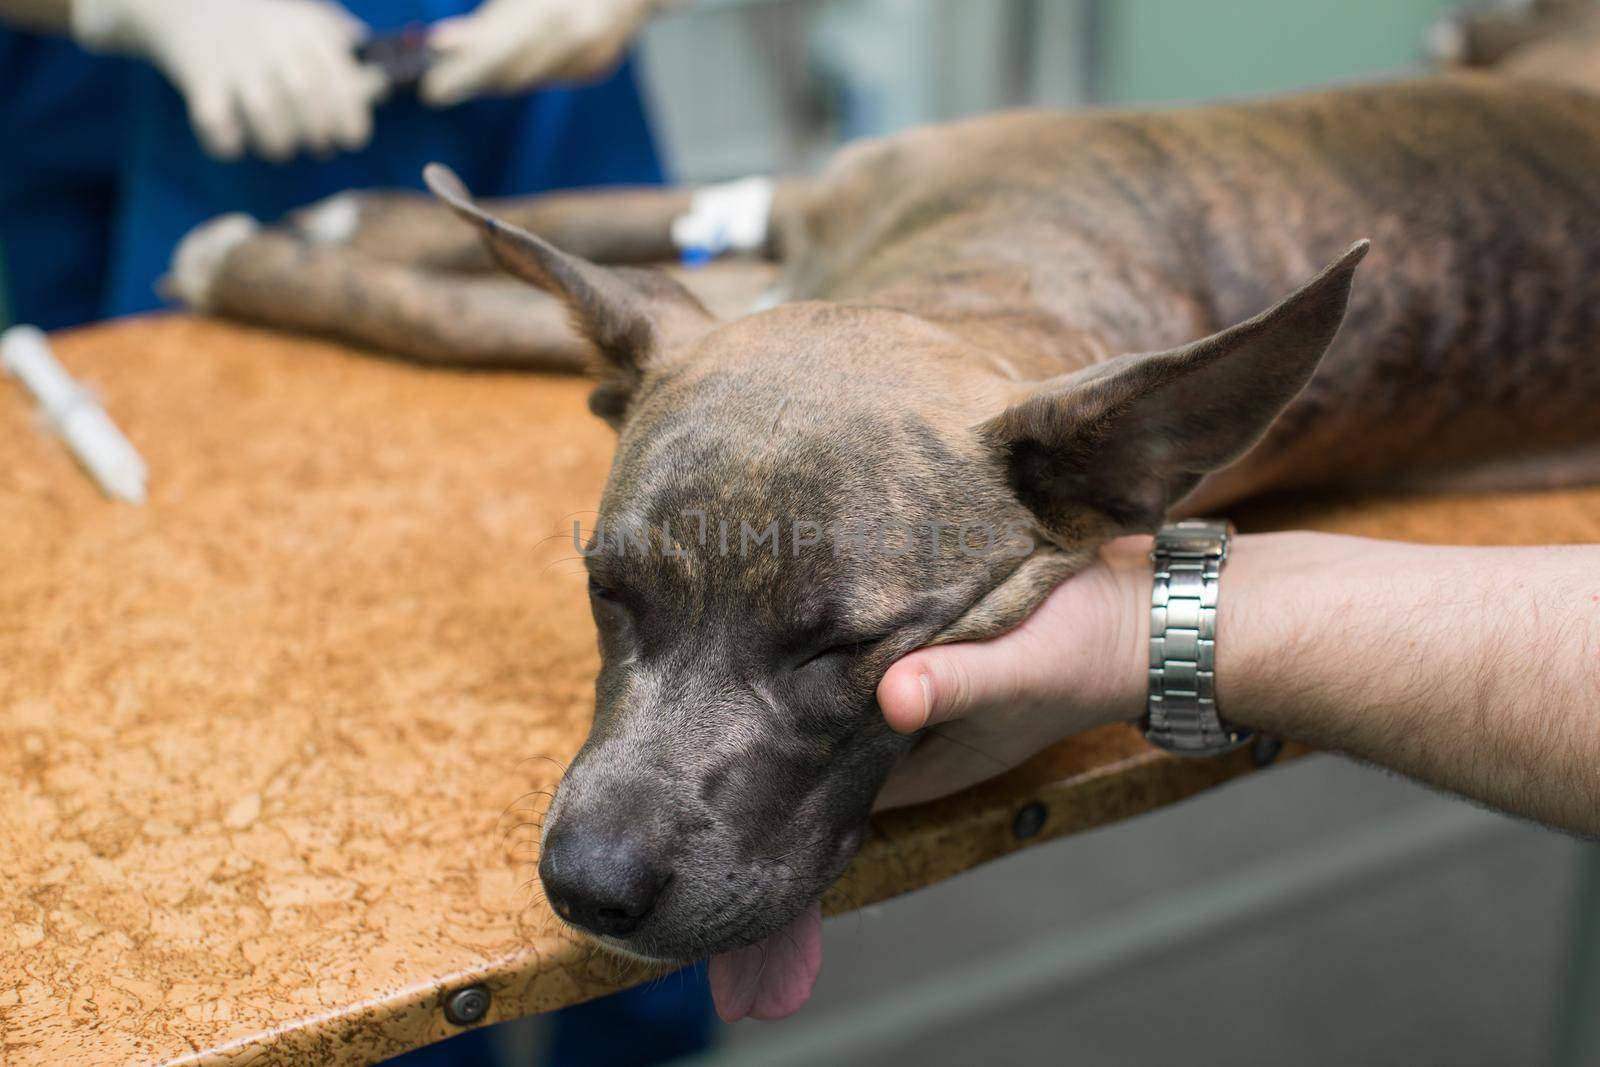 The dog is under anesthesia before surgery in a veterinary clinic